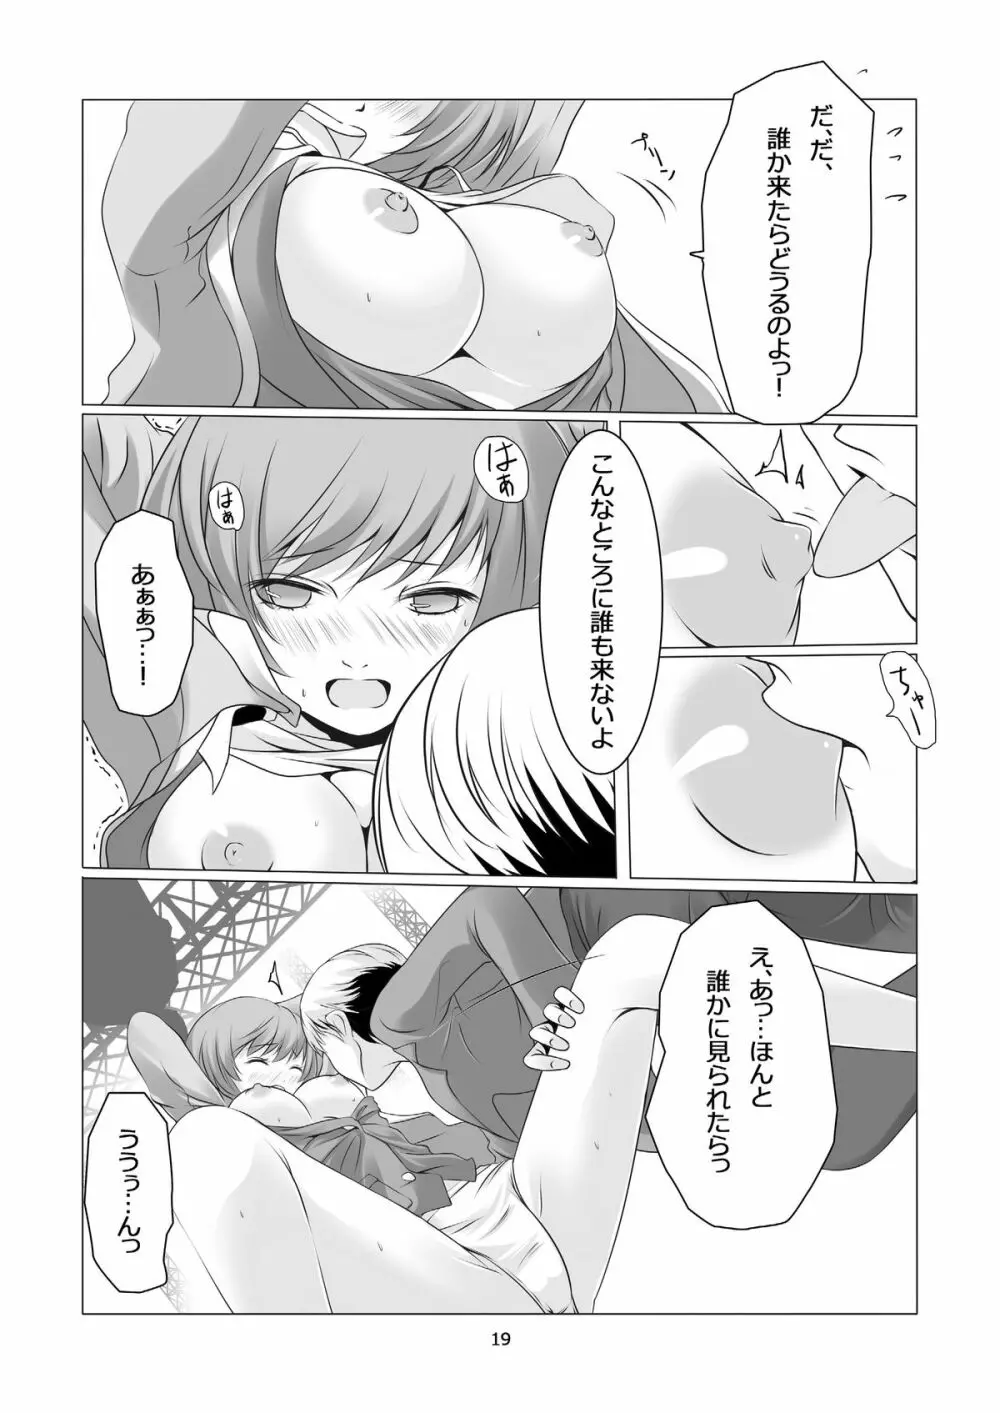 Persona 4: The Doujin #2 Page.21